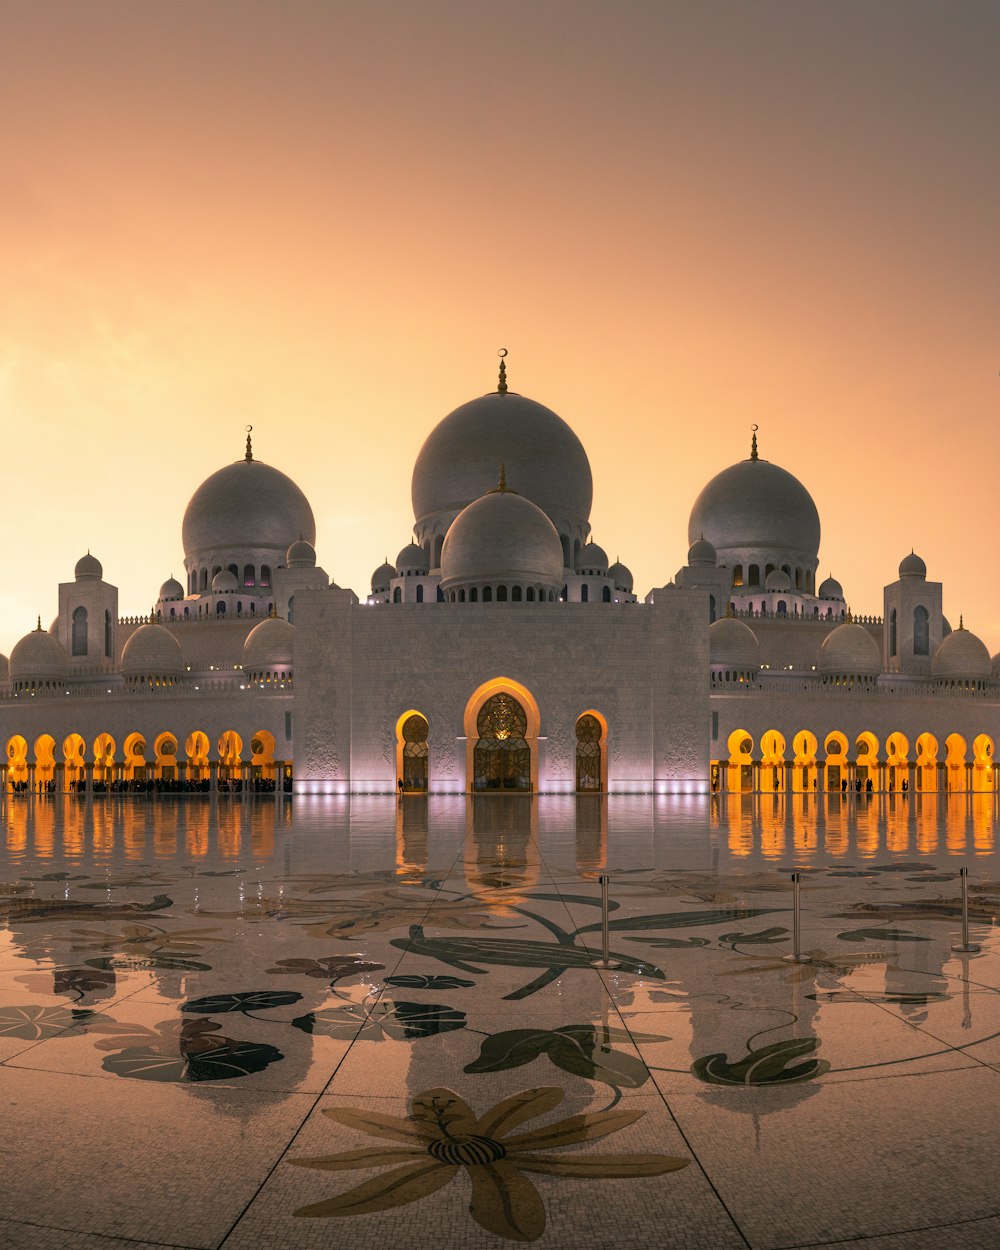 999+ Islamic Architecture Pictures | Download Free Images on Unsplash